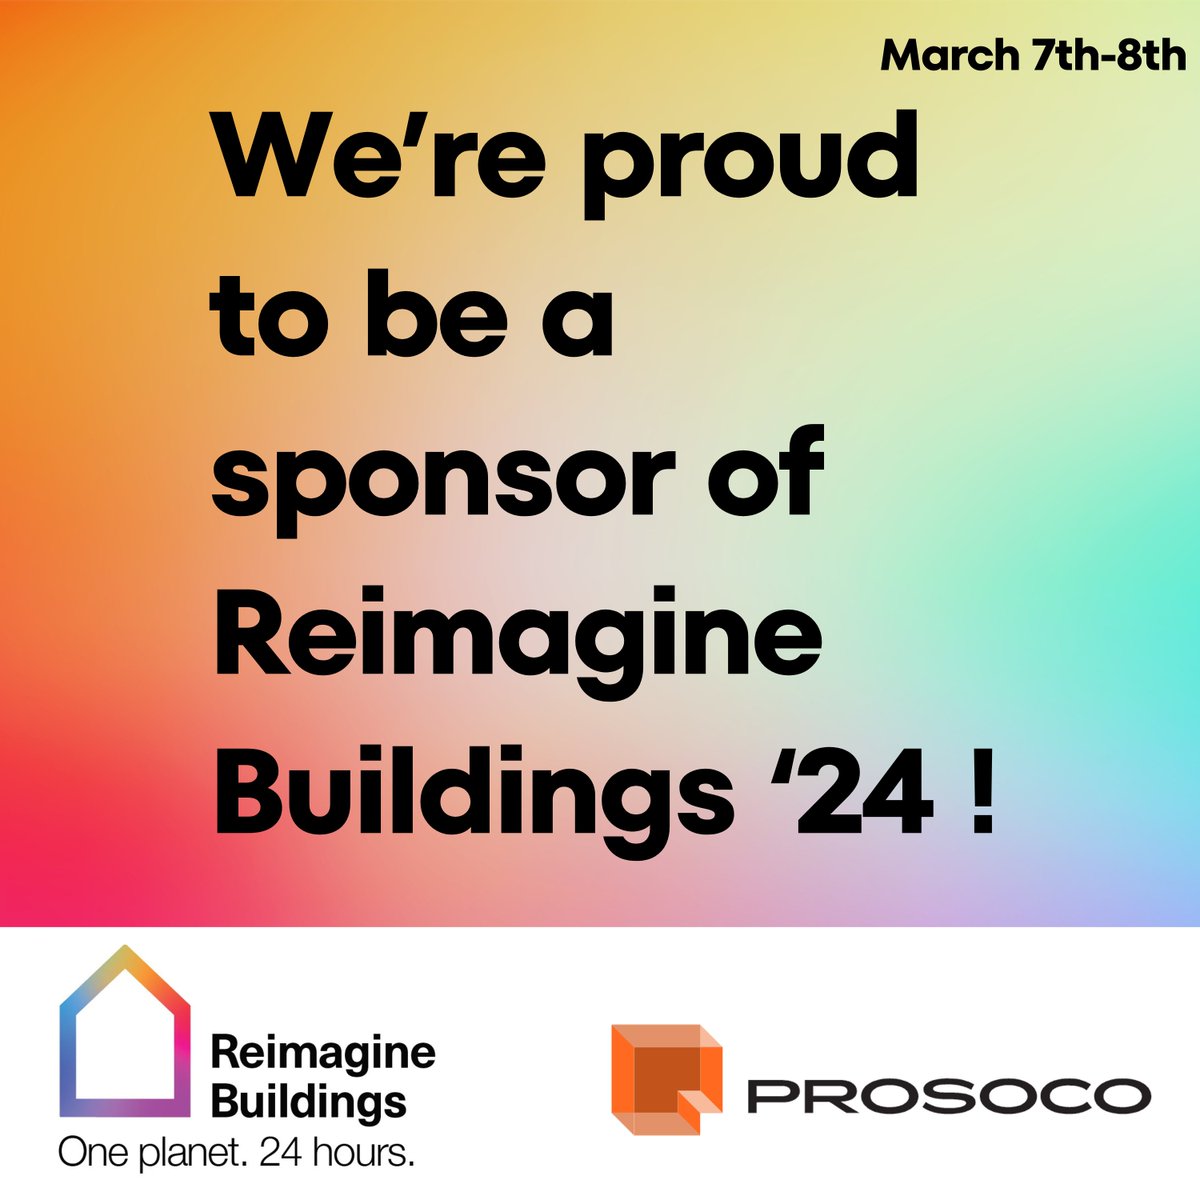 Passive House Accelerator's Reimagine Buildings 24 is a virtual event for 24 straight hours this March 7-8. Register to hear from #PassiveHouse experts on various topics and recent #MultiFamily PH projects that benefitted from R-Guard #AirBarriers. #RB24 hubs.ly/Q02knt5q0